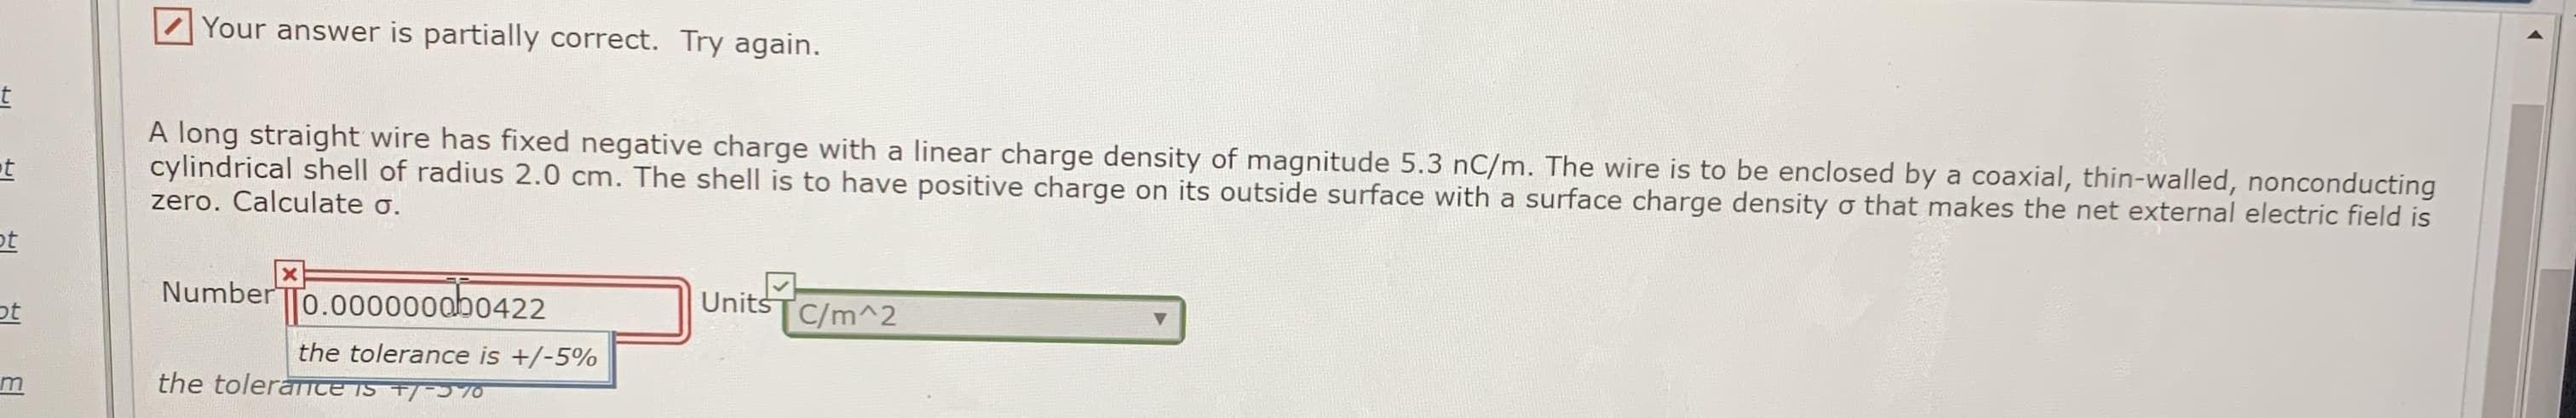 Your answer is partially correct. Try again.
A long straight wire has fixed negative charge with a linear charge density of magnitude 5.3 nC/m. The wire is to be enclosed by a coaxial, thin-walled, nonconducting
cylindrical shell of radius 2.0 cm. The shell is to have positive charge on its outside surface with a surface charge density o that makes the net external electric field is
zero. Calculate o.
ot
Number o.00000oabo422
Units
bt
C/m^2
the tolerance is +/-5%
the toleranICE IS T/-5770
